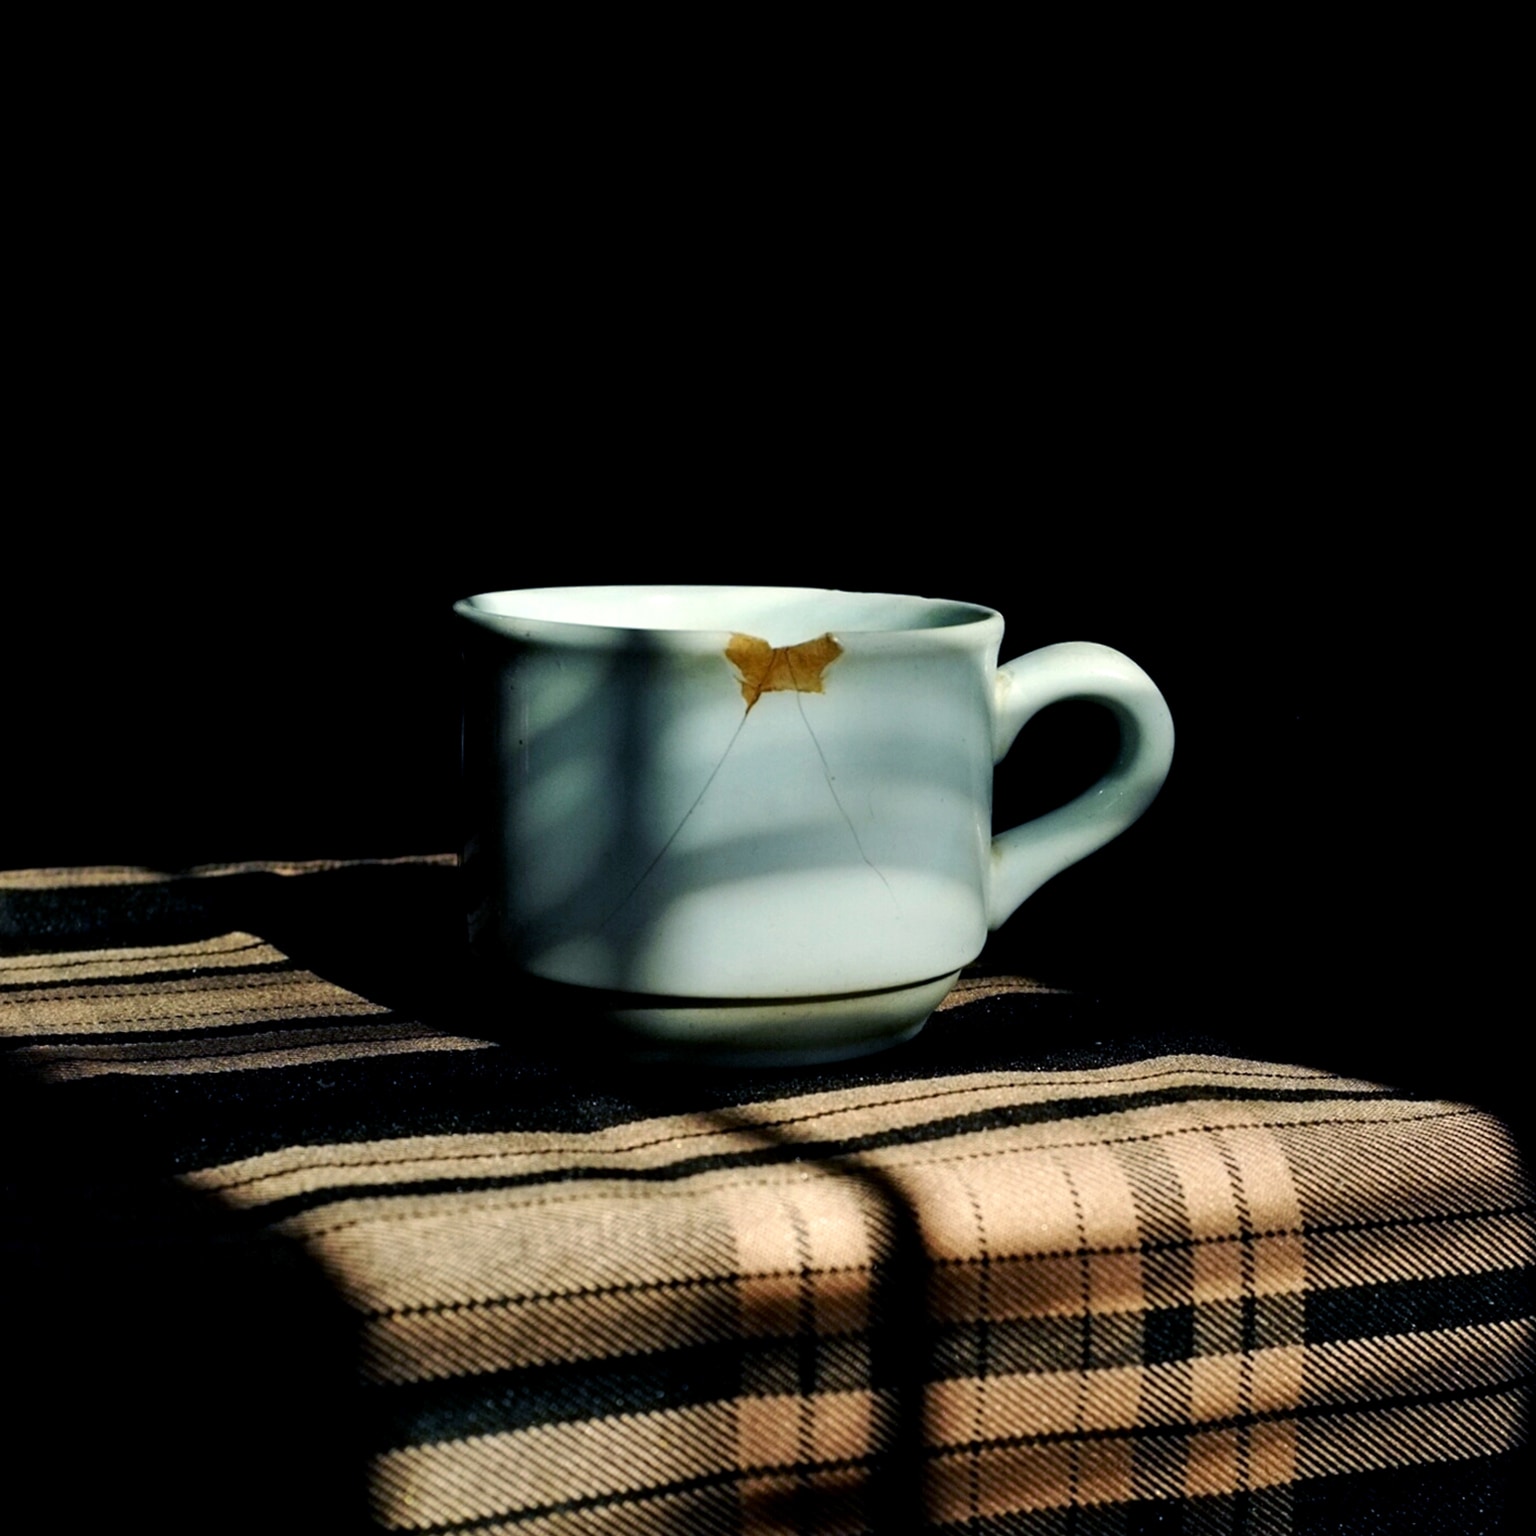 Close-Up Of Broken Coffee Cup Against Black Background